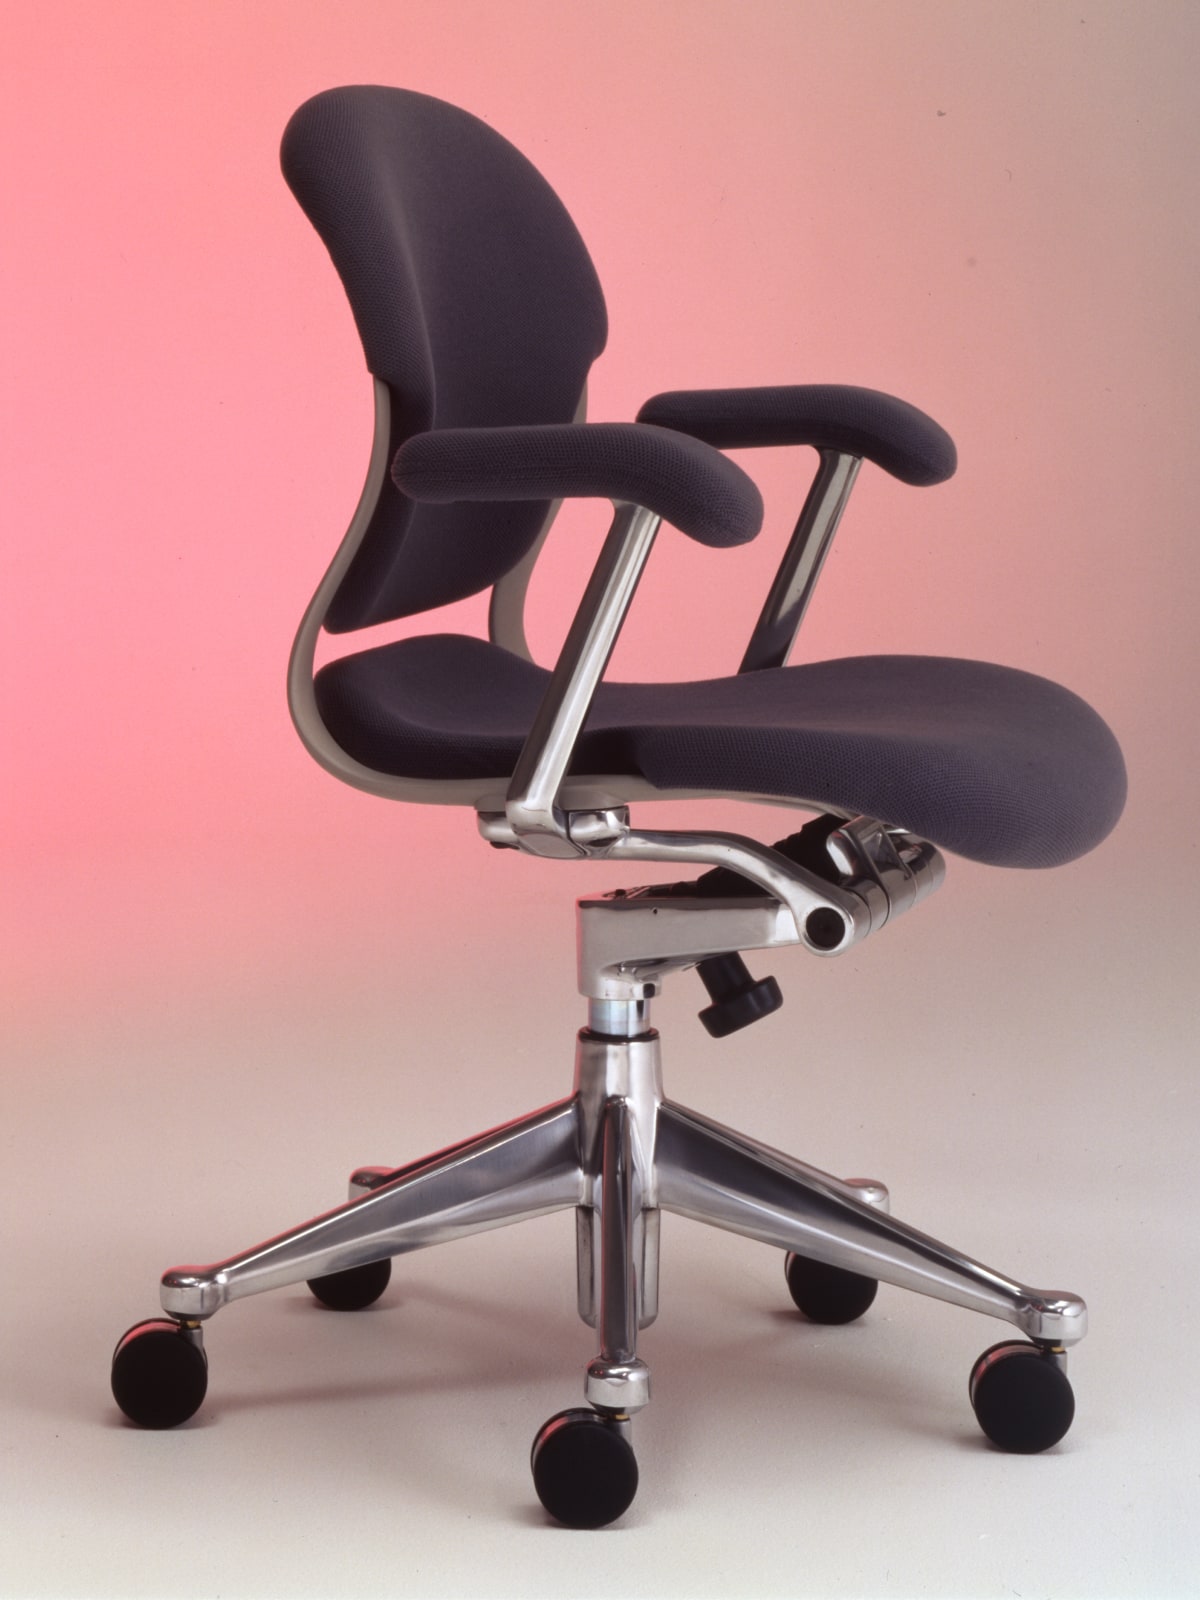 A Herman Miller Ergon chair with polished hardware and dark grey upholstery